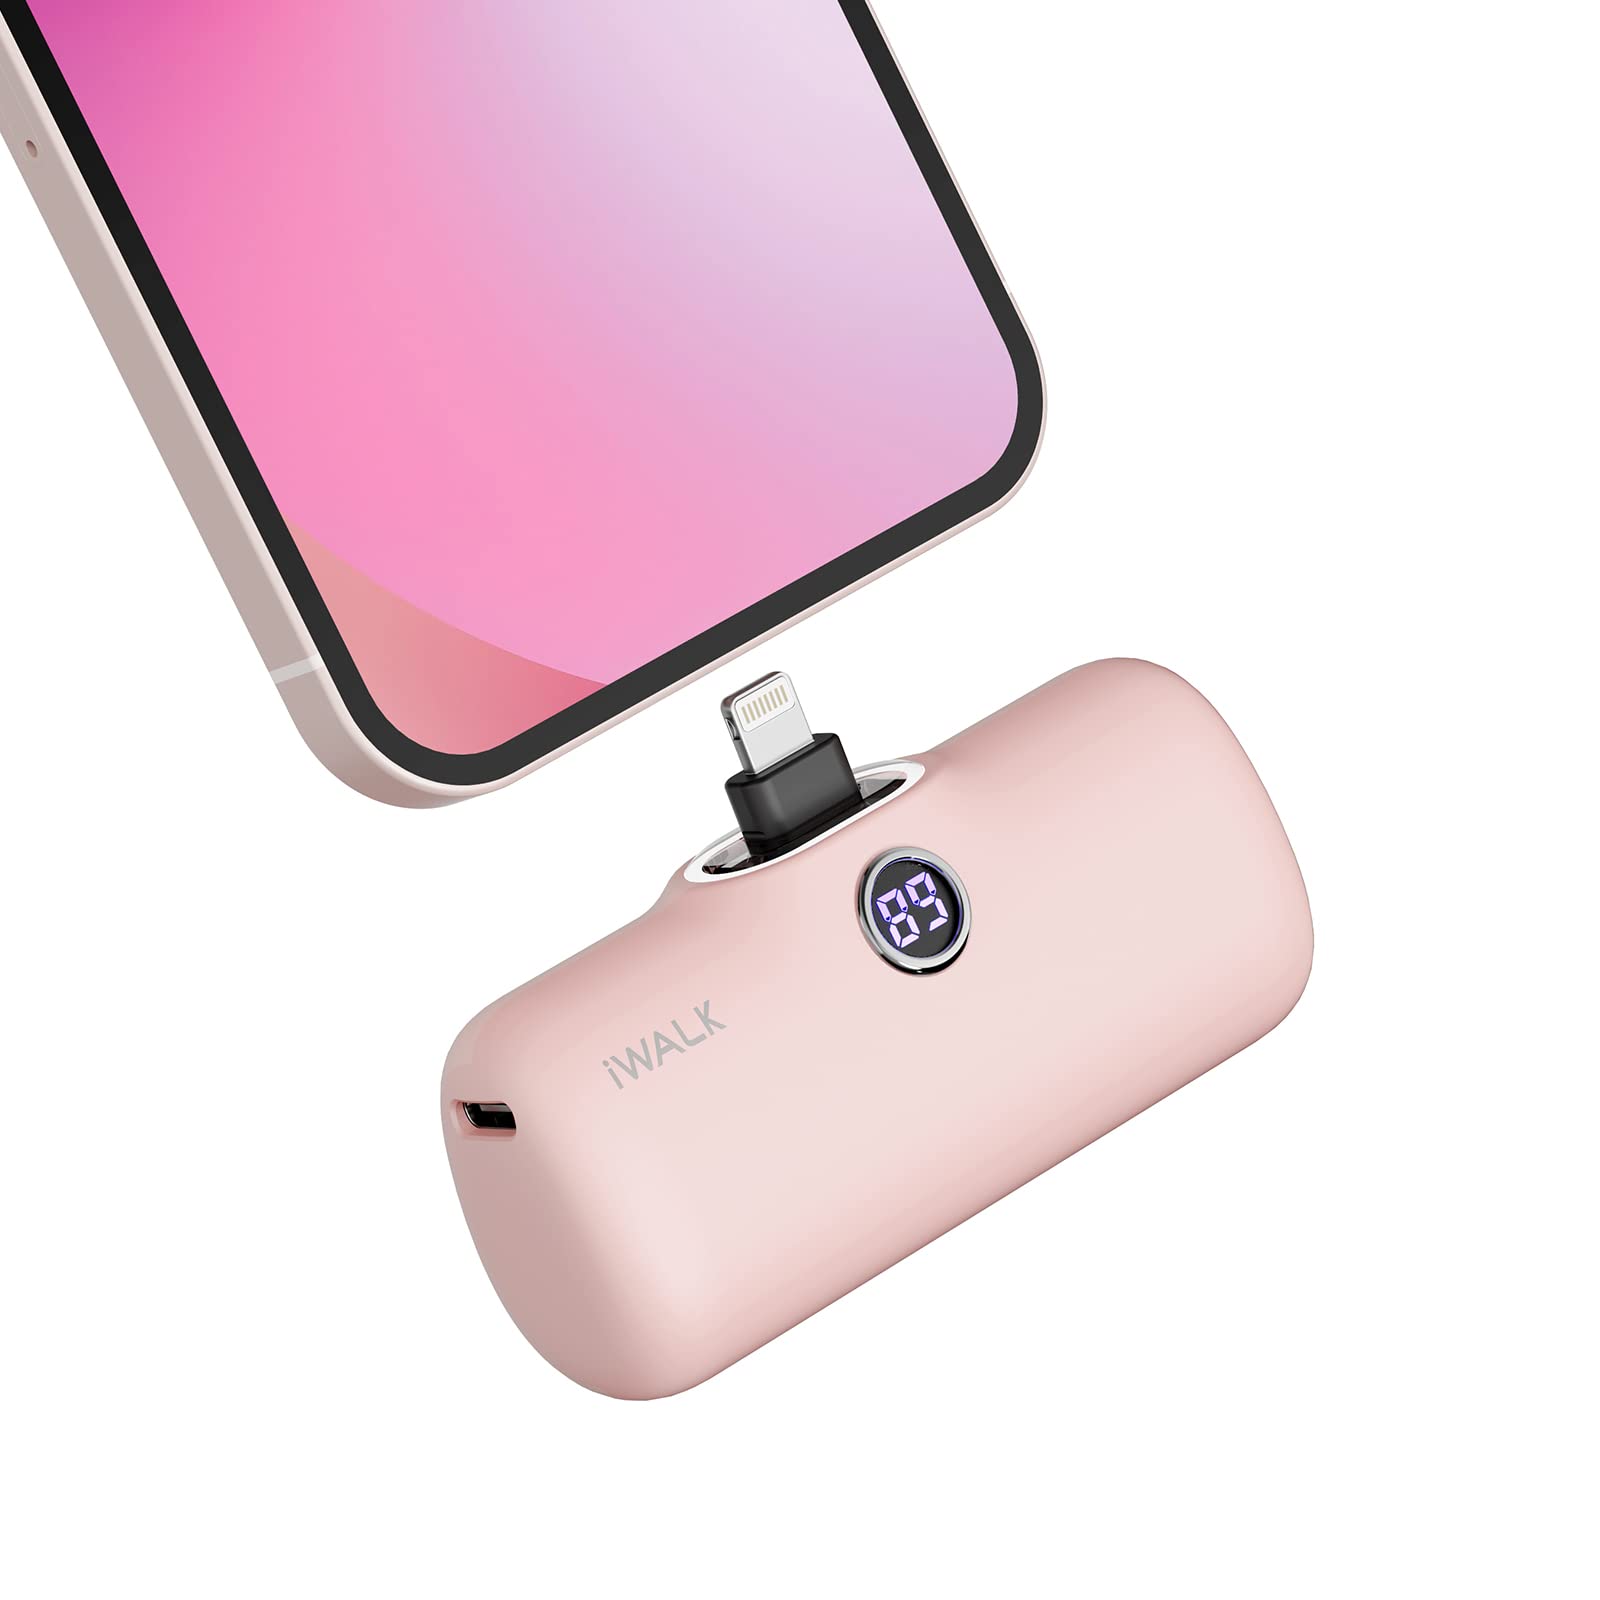 iWALK Portable Charger 4800mAh Power Bank Small and Cute Battery Pack Fast Charging power bank Compatible with iPhone 13/13 Pro/13 Pro Max /12/12 Pro/12 Pro Max/11 Pro/XR/X/8/Plus，Pink